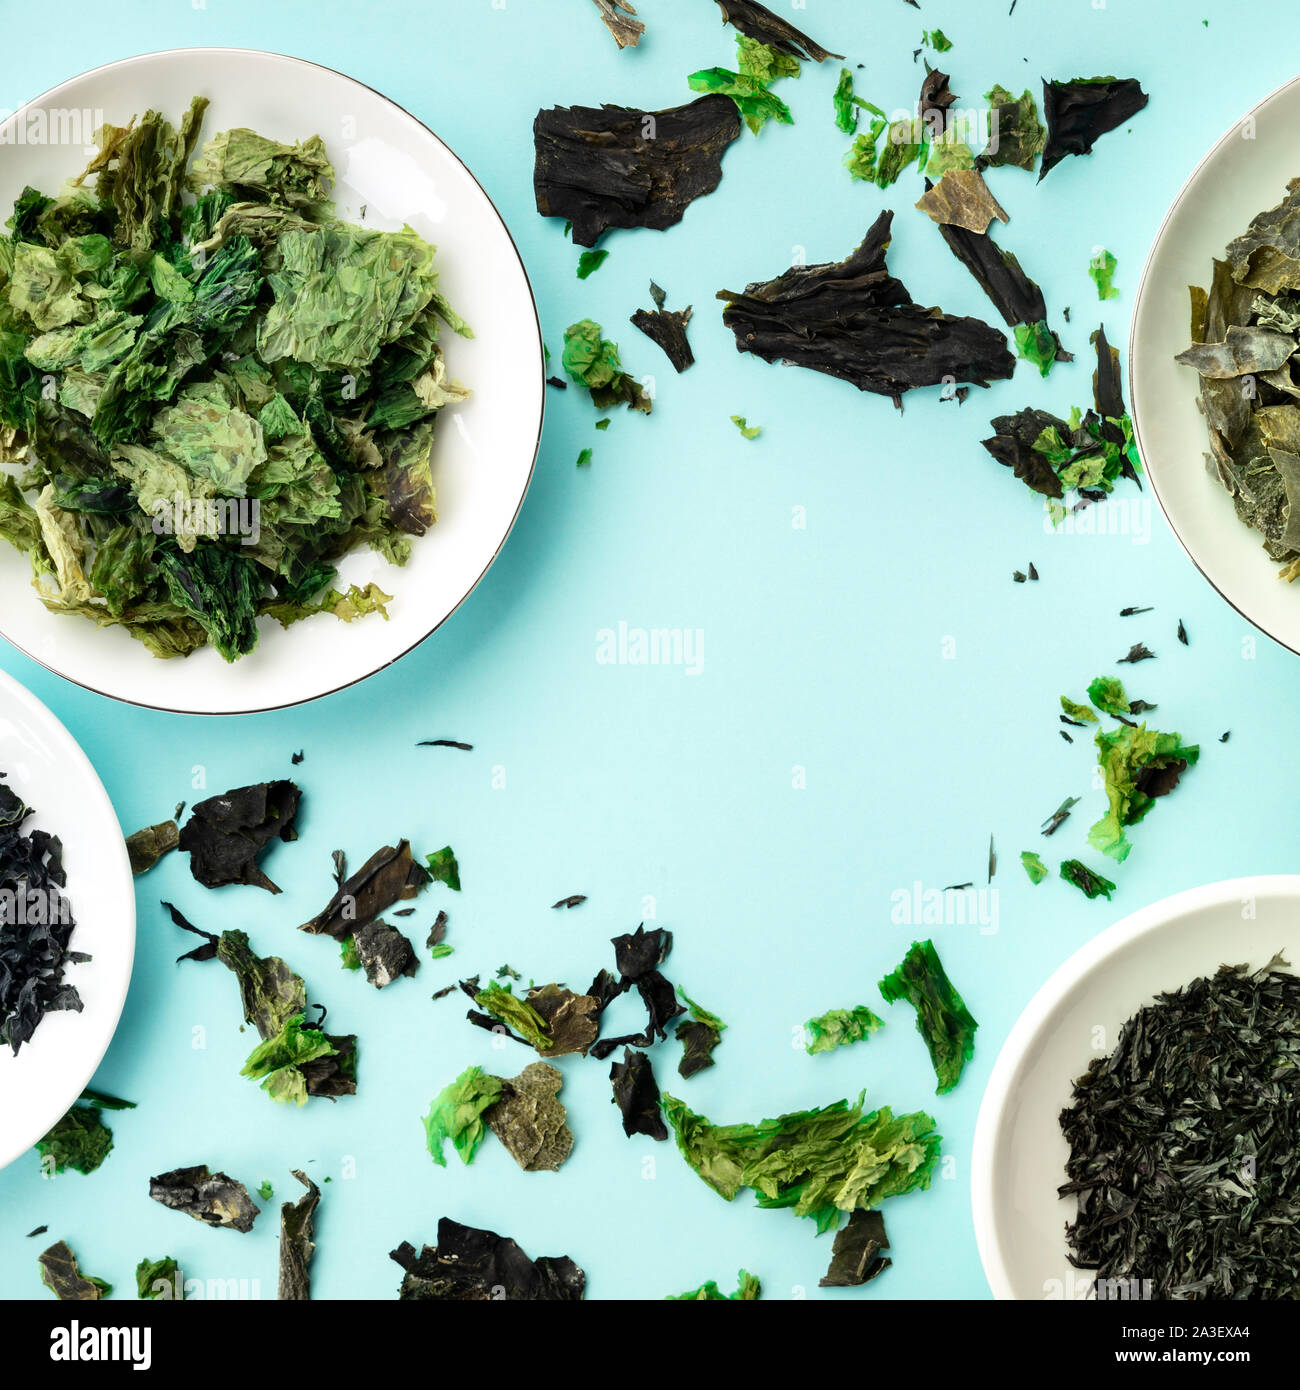 Various dry seaweed, sea vegetables, square overhead shot on a teal background forming a frame with a place for text Stock Photo